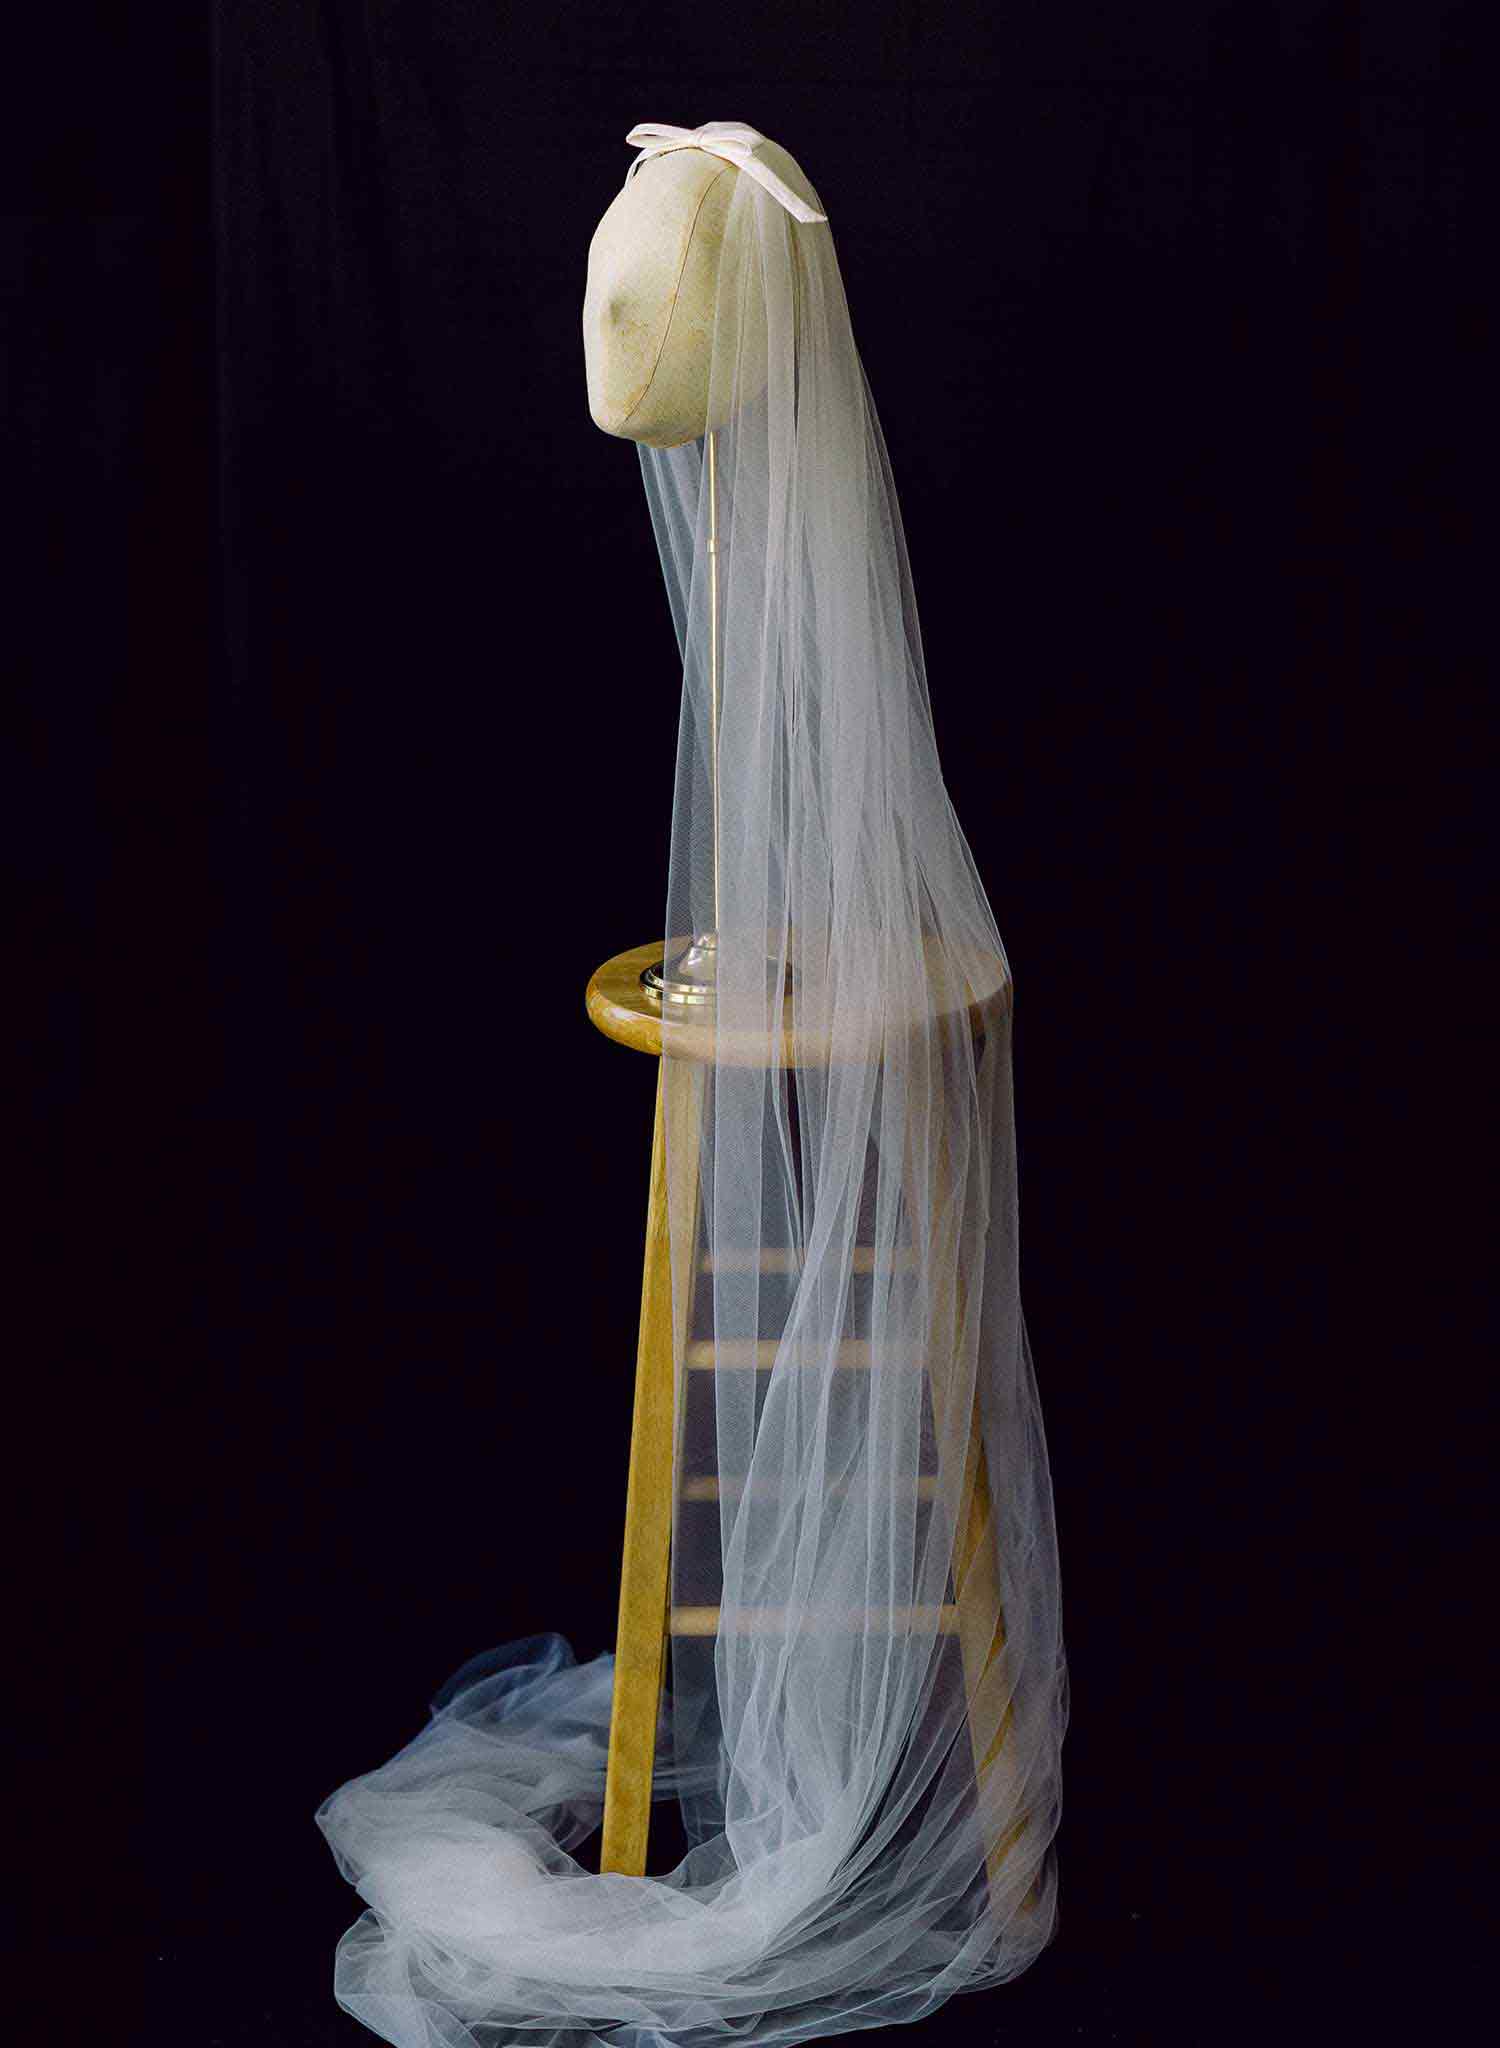 Whisper chapel veil with silk bow - Style #2369